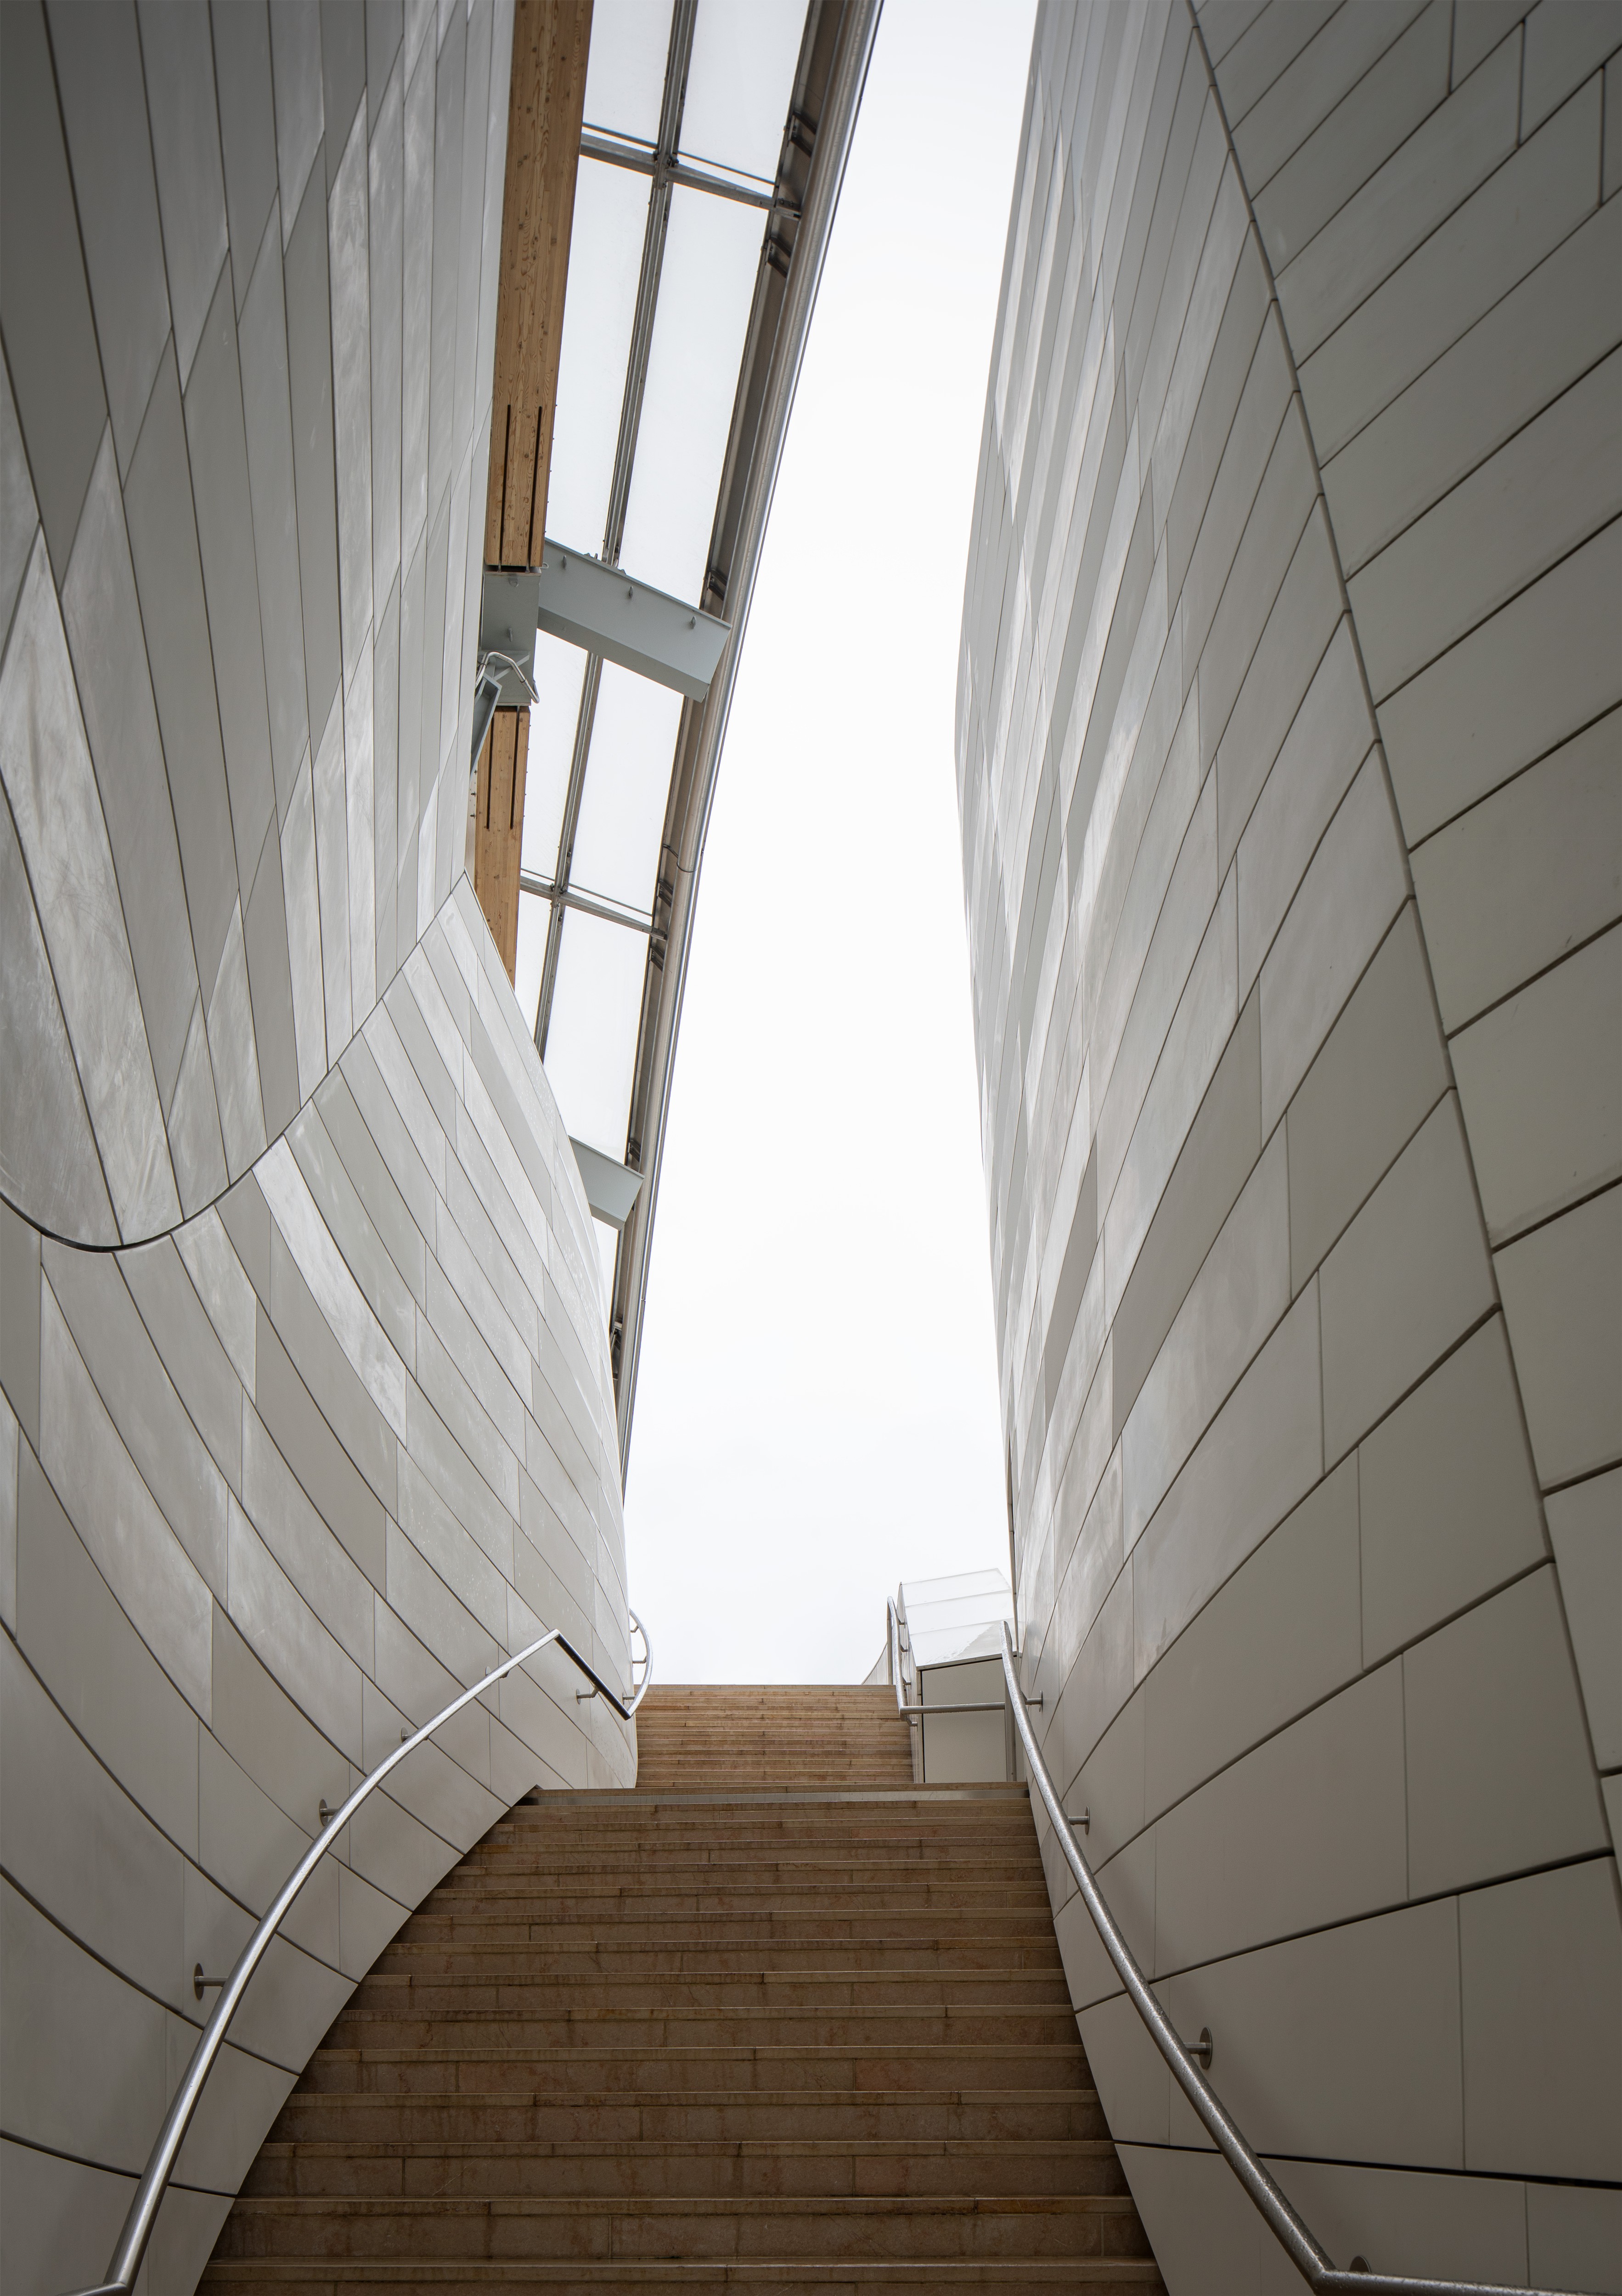 ▷ Fondation Louis Vuitton Stairs by Mark Elst, 2018, Photography